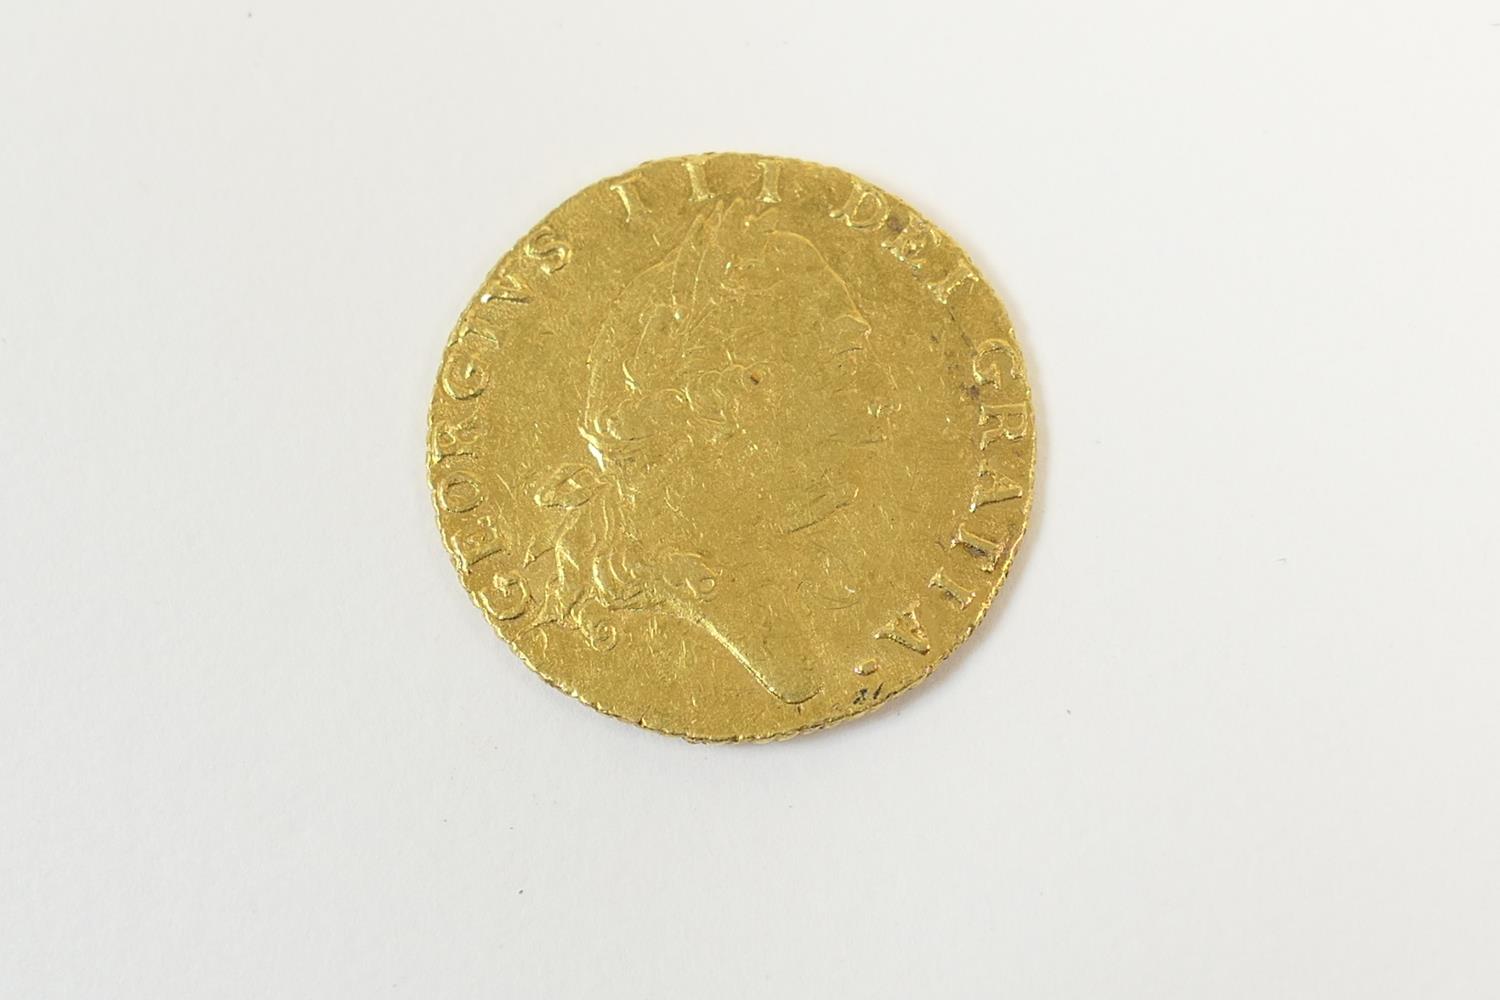 George III spade half guinea, 1793 (VF), weight approx. 4.4g (Viewing is by appointment only